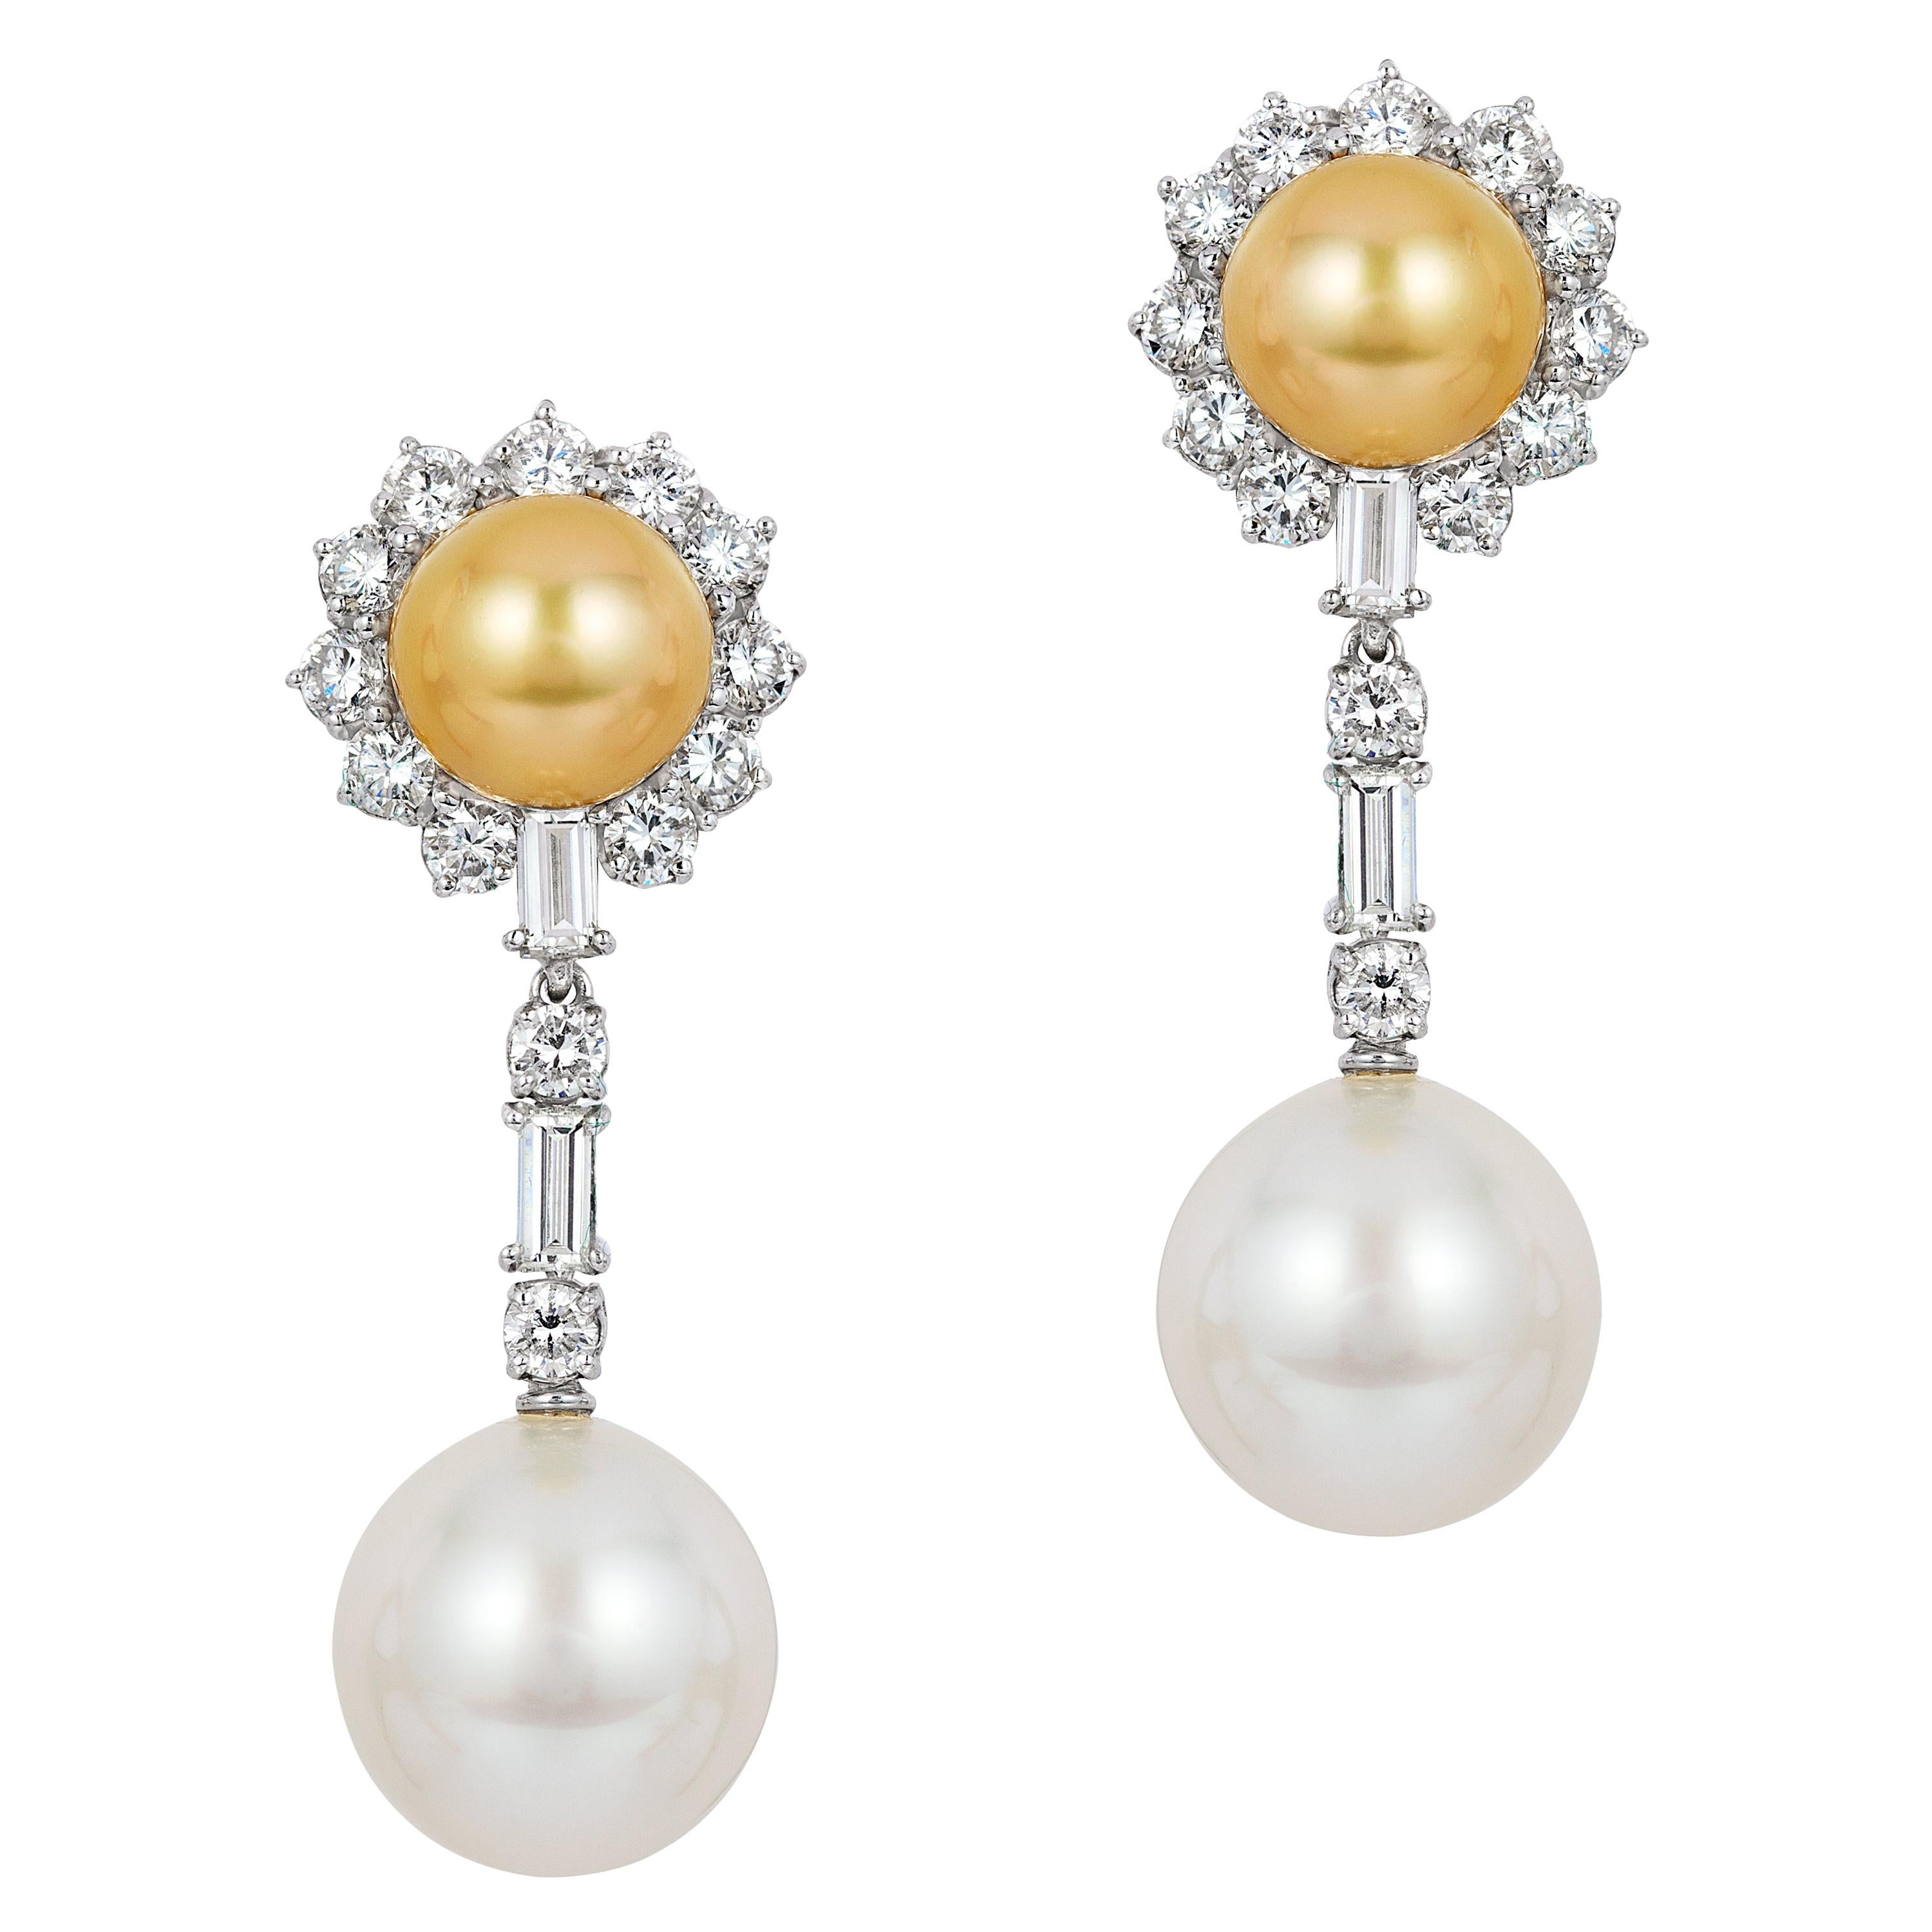 Andreoli Golden and White South Sea Pearl Drop and Stud Diamond Earrings 18kt